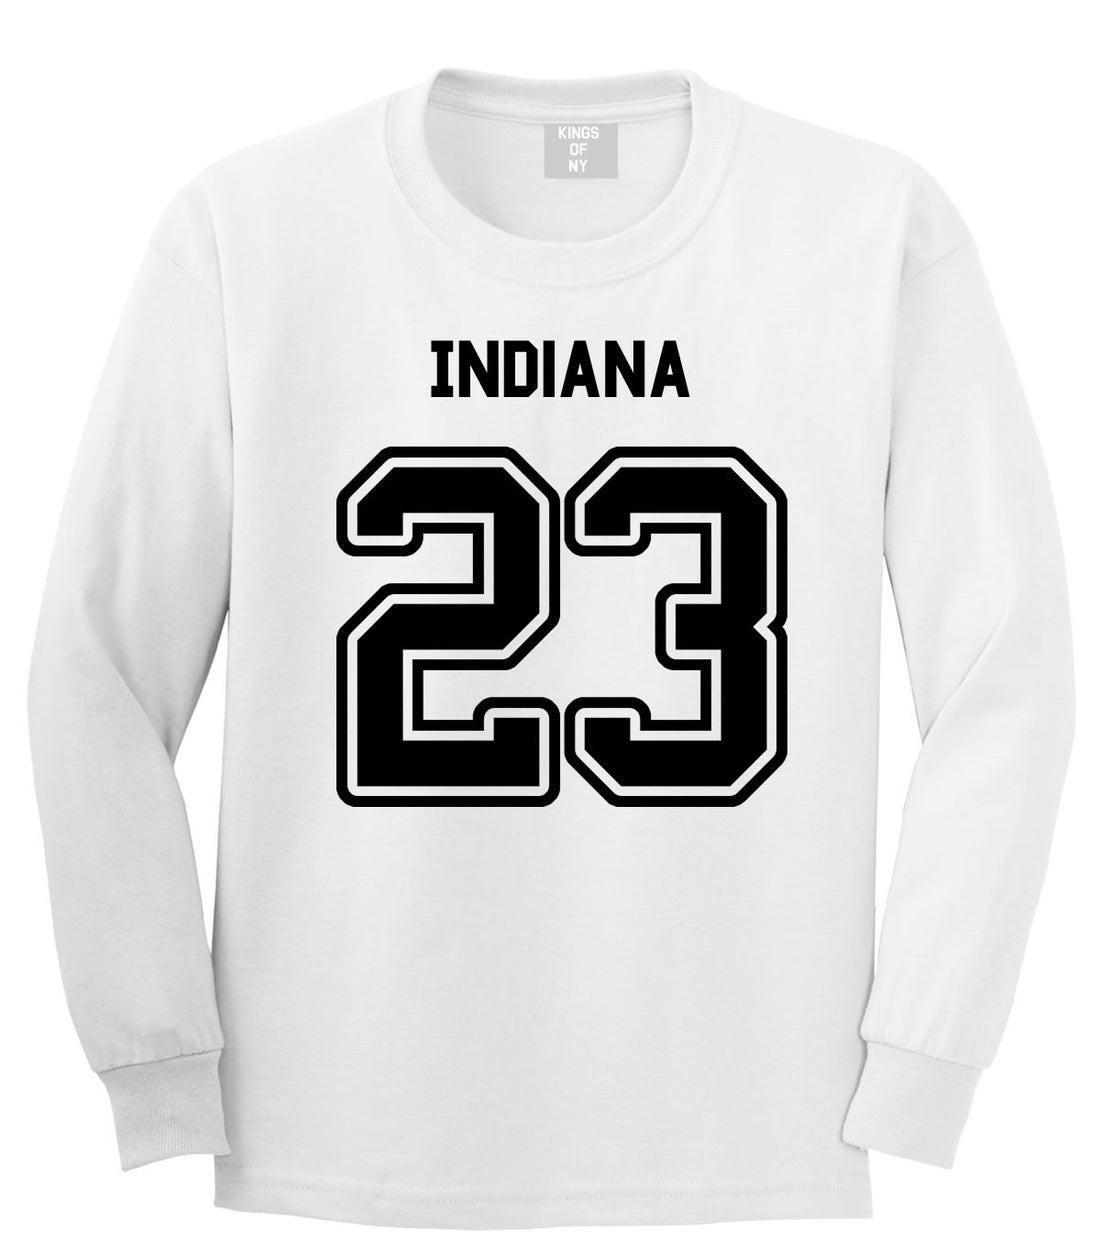 Sport Style Indiana 23 Team State Jersey Long Sleeve T-Shirt By Kings Of NY